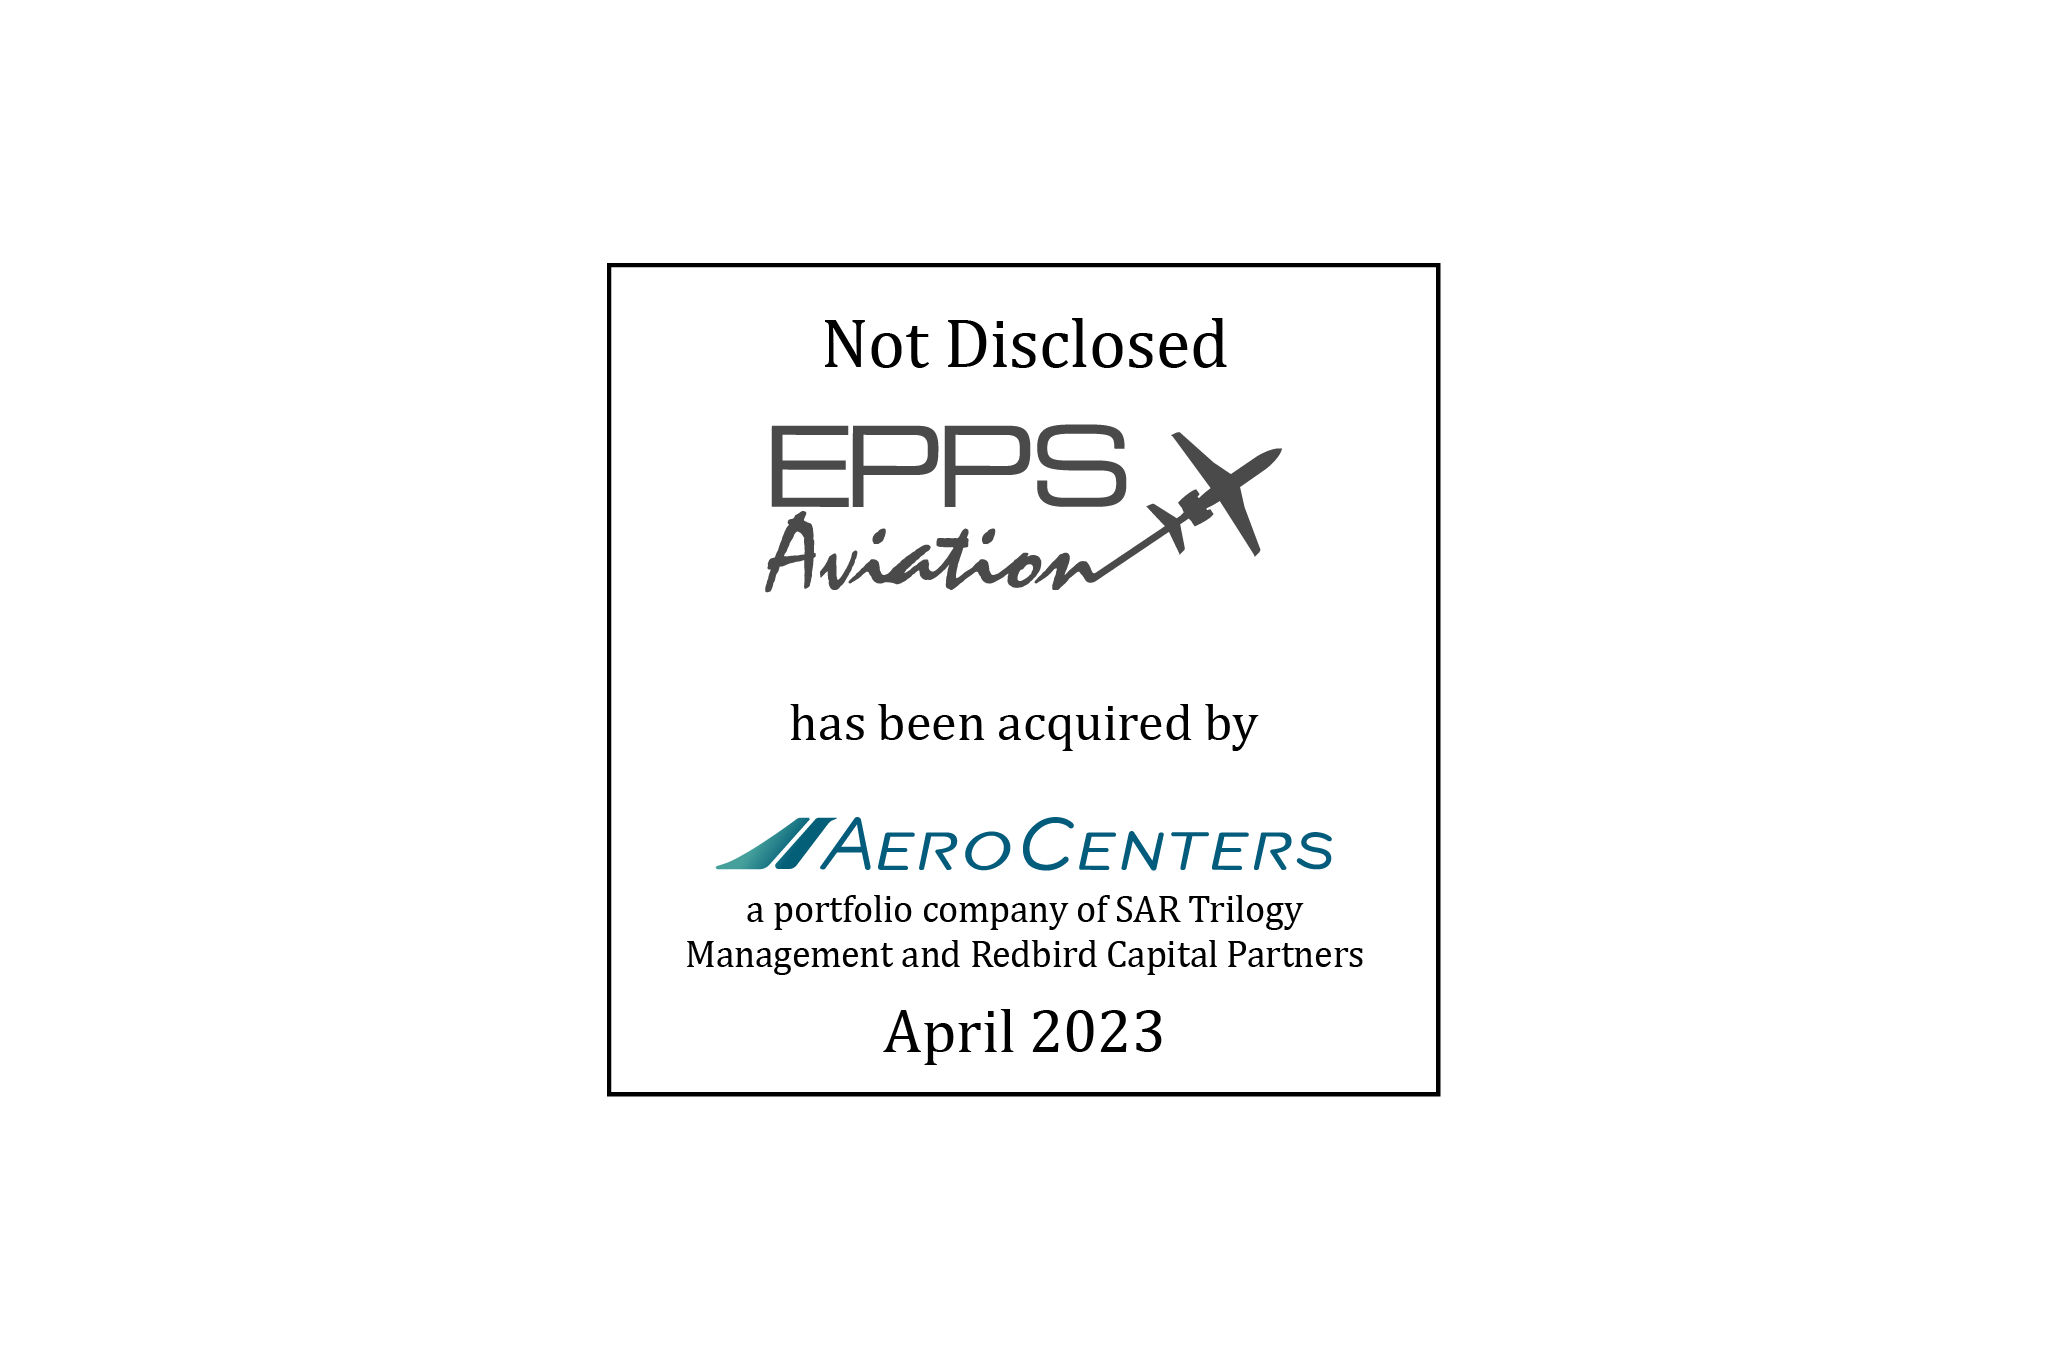 Not Disclosed | Epps Aviation (logo) has Been Acquired by Aero Centers (logo), a portfolio company of SAR-Trilogy and RedBird Capital | April 2023